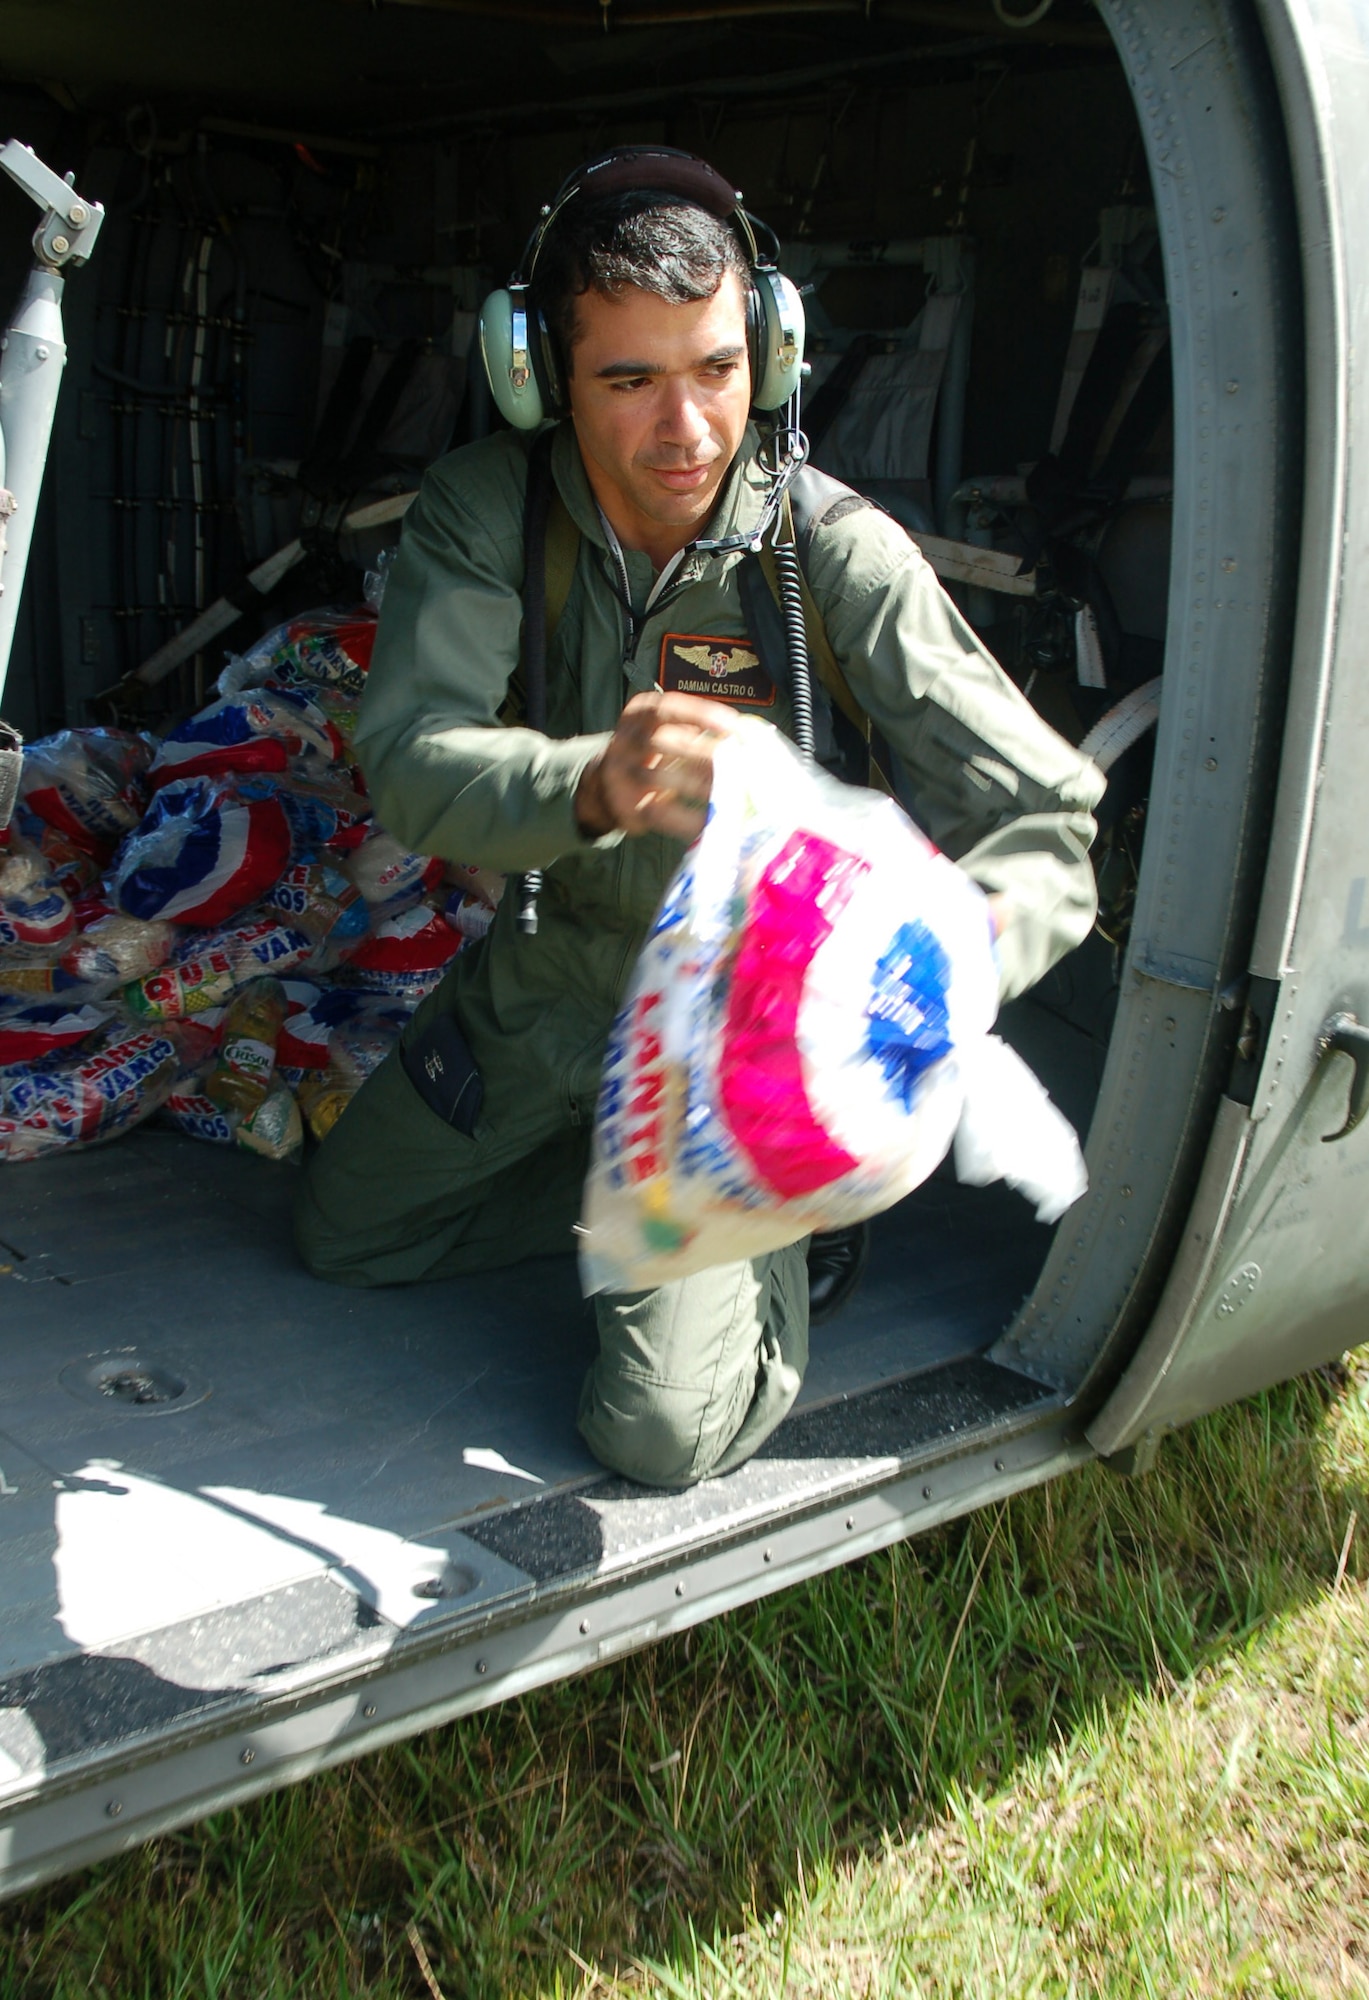 AZUA, Dominican Republic -- 1st Lt. Damian Castro, Dominican air force, tosses bags of food out of an idling UH-60 Black Hawk helicopter to local villagers during a food delivery Nov. 11.  As of Nov. 12, American and British aircrews had delivered more than 241,000 pounds of provisions to the island nation as part of a Combined, Joint, International relief effort following Tropical Storm Noel.  (U.S. Air Force photo by Staff Sgt. Austin M. May)